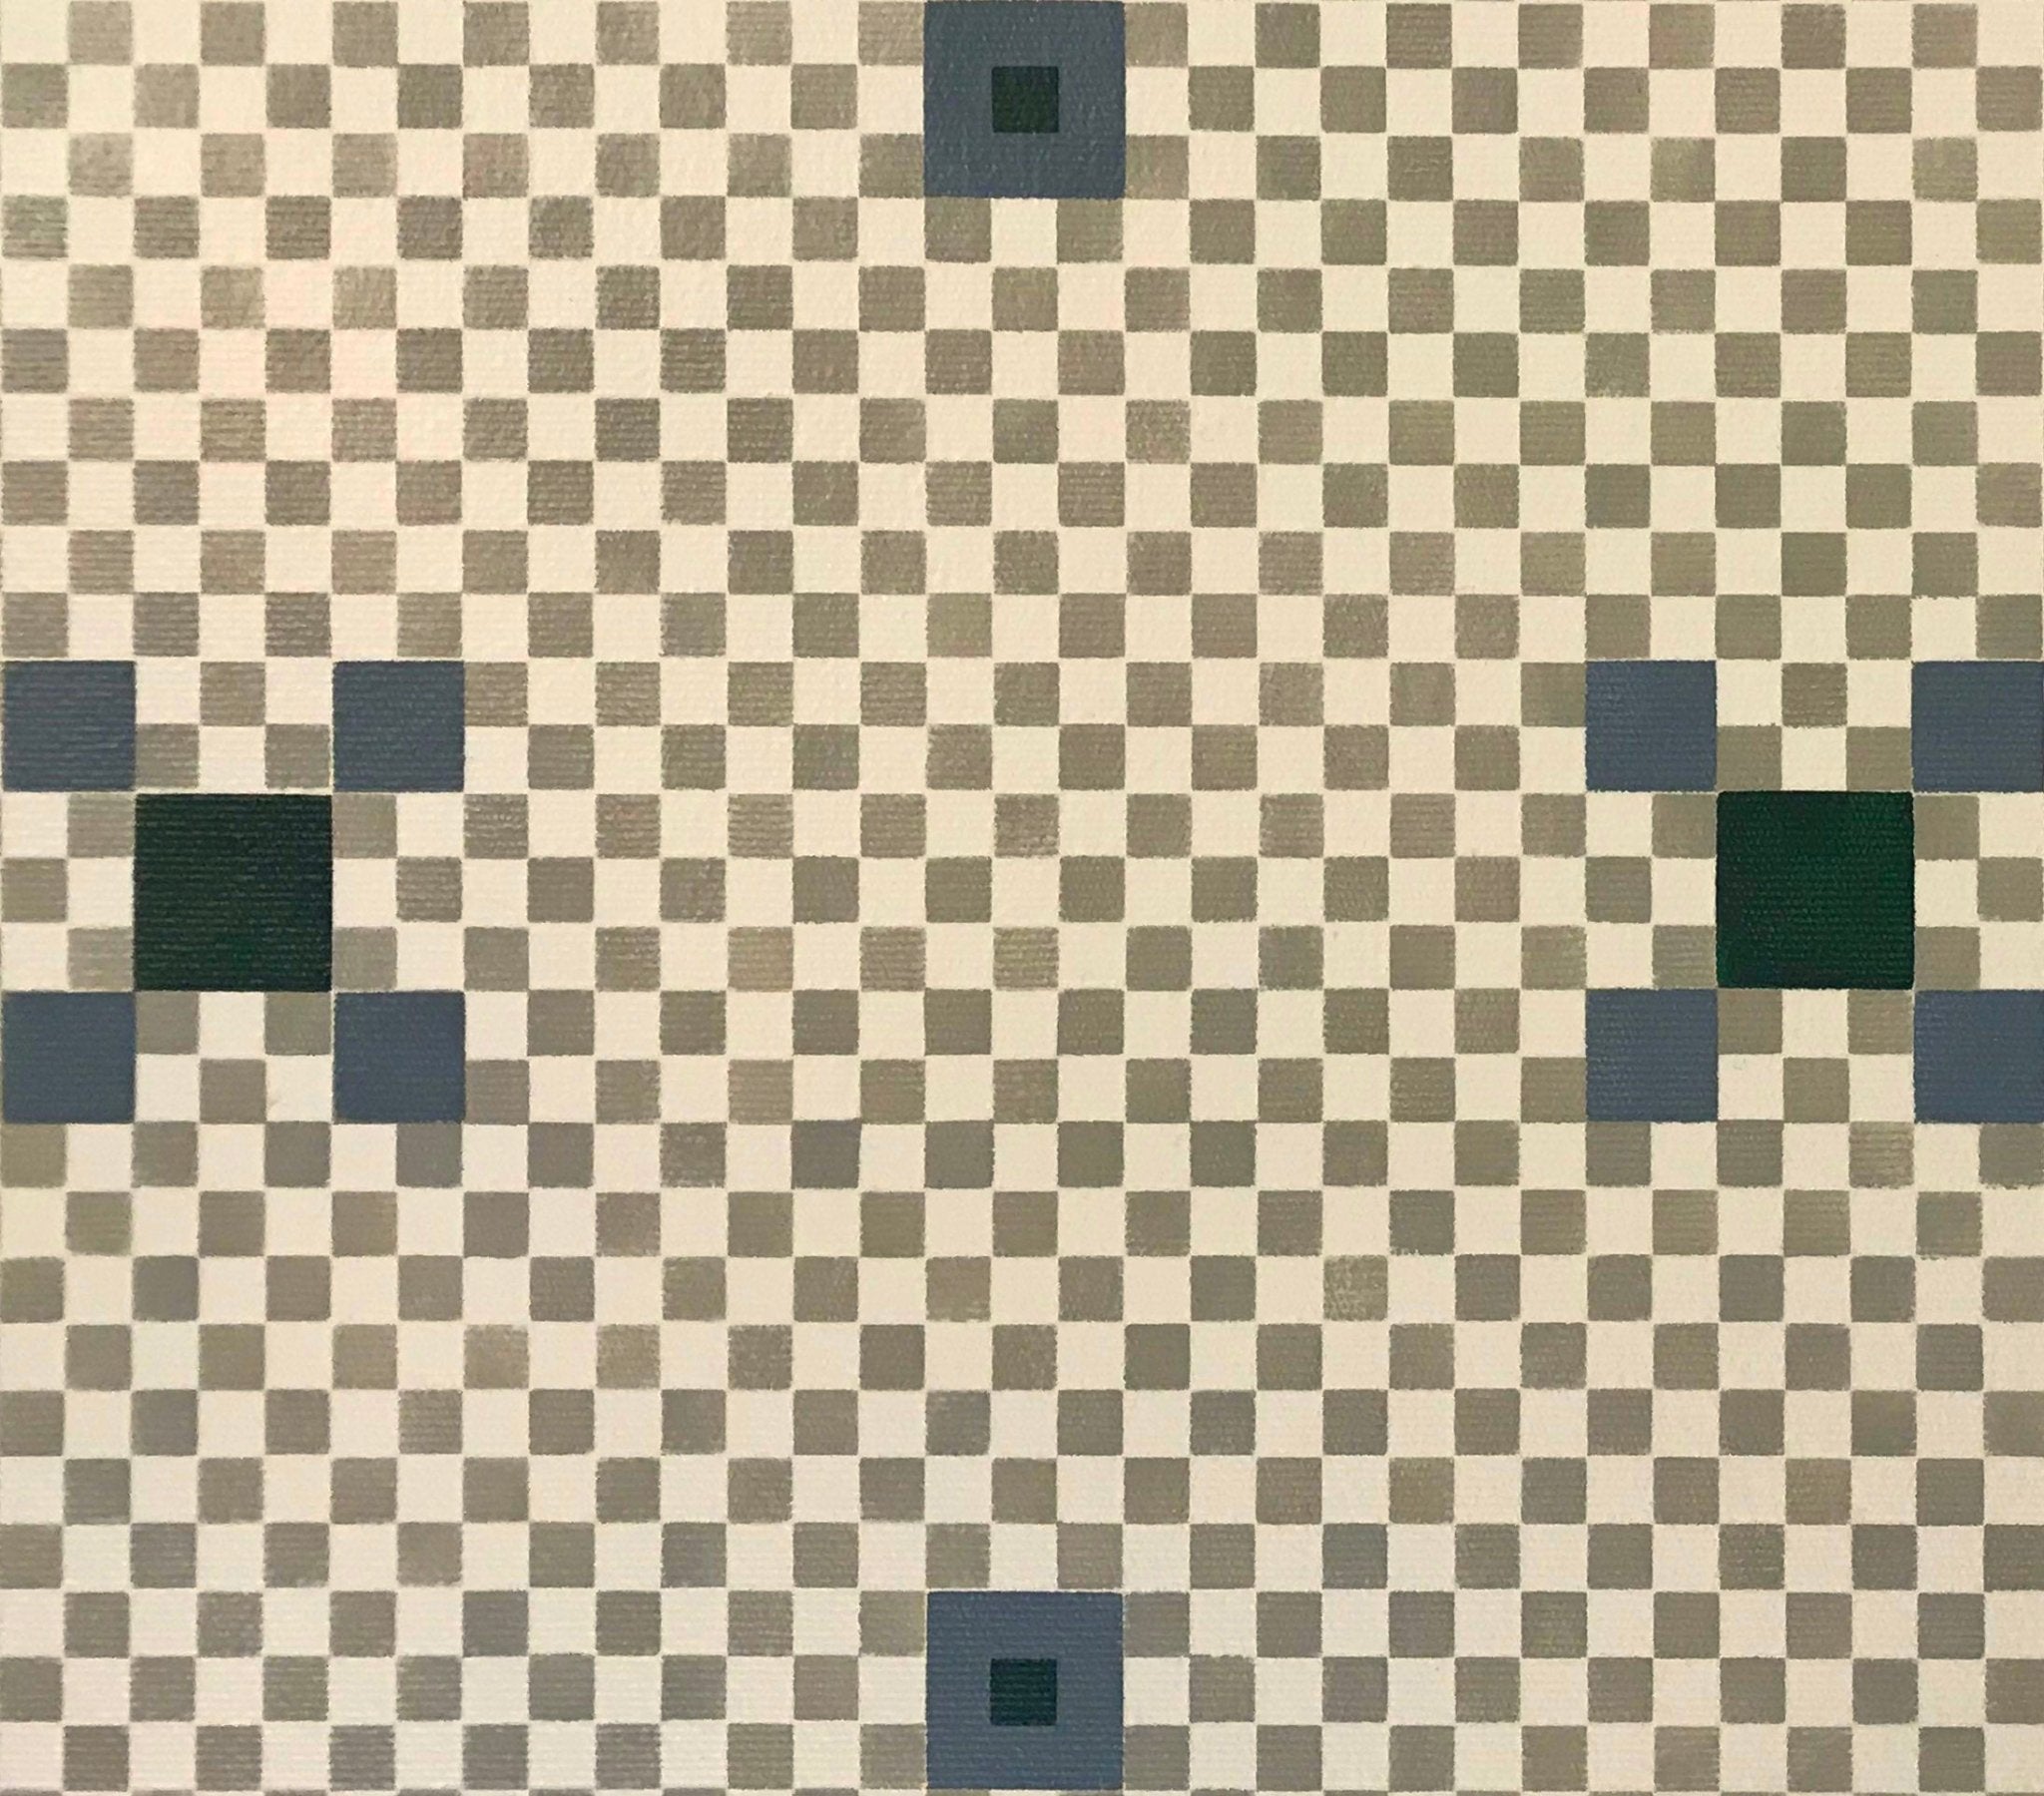 A close up of this floorcloth based on an original linoleum pattern with seven diamonds between elements and the patten on the square.